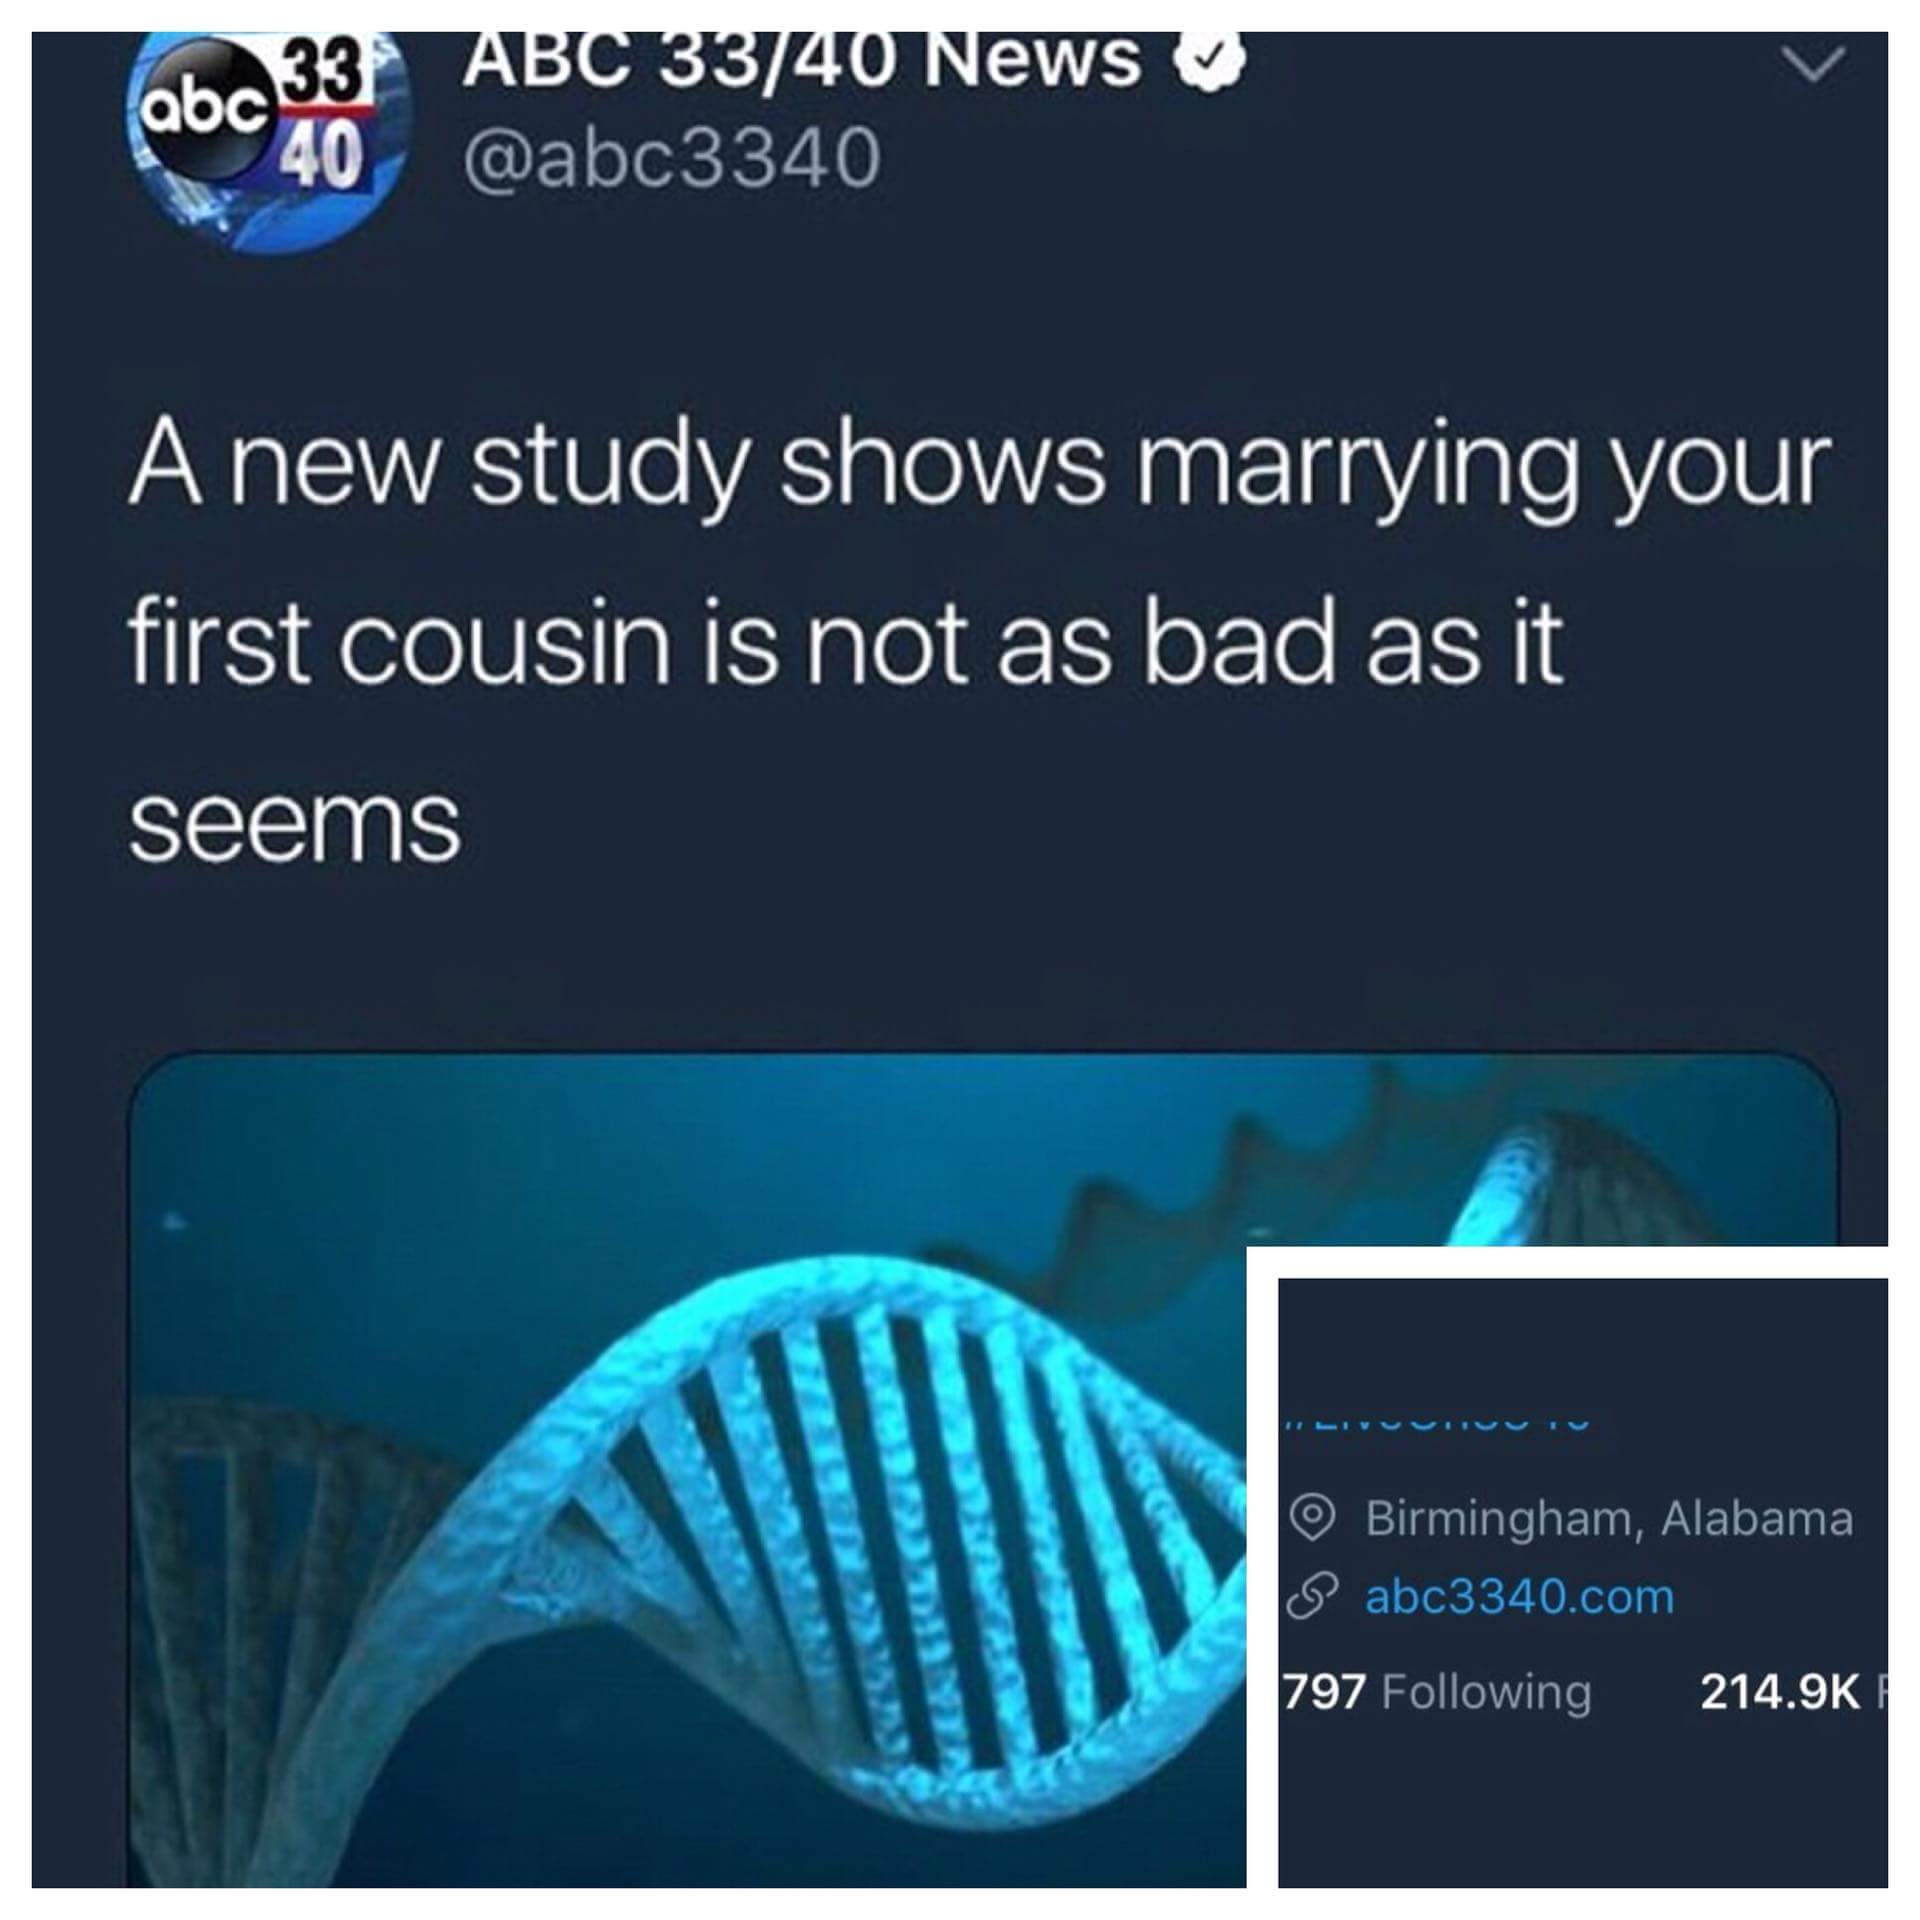 marrying your first cousin isn t as bad as it seems - 33 Abc 3340 News 100c40 A new study shows marrying your first cousin is not as bad as it seems Birmingham, Alabama Sabc3340.com 797 ing